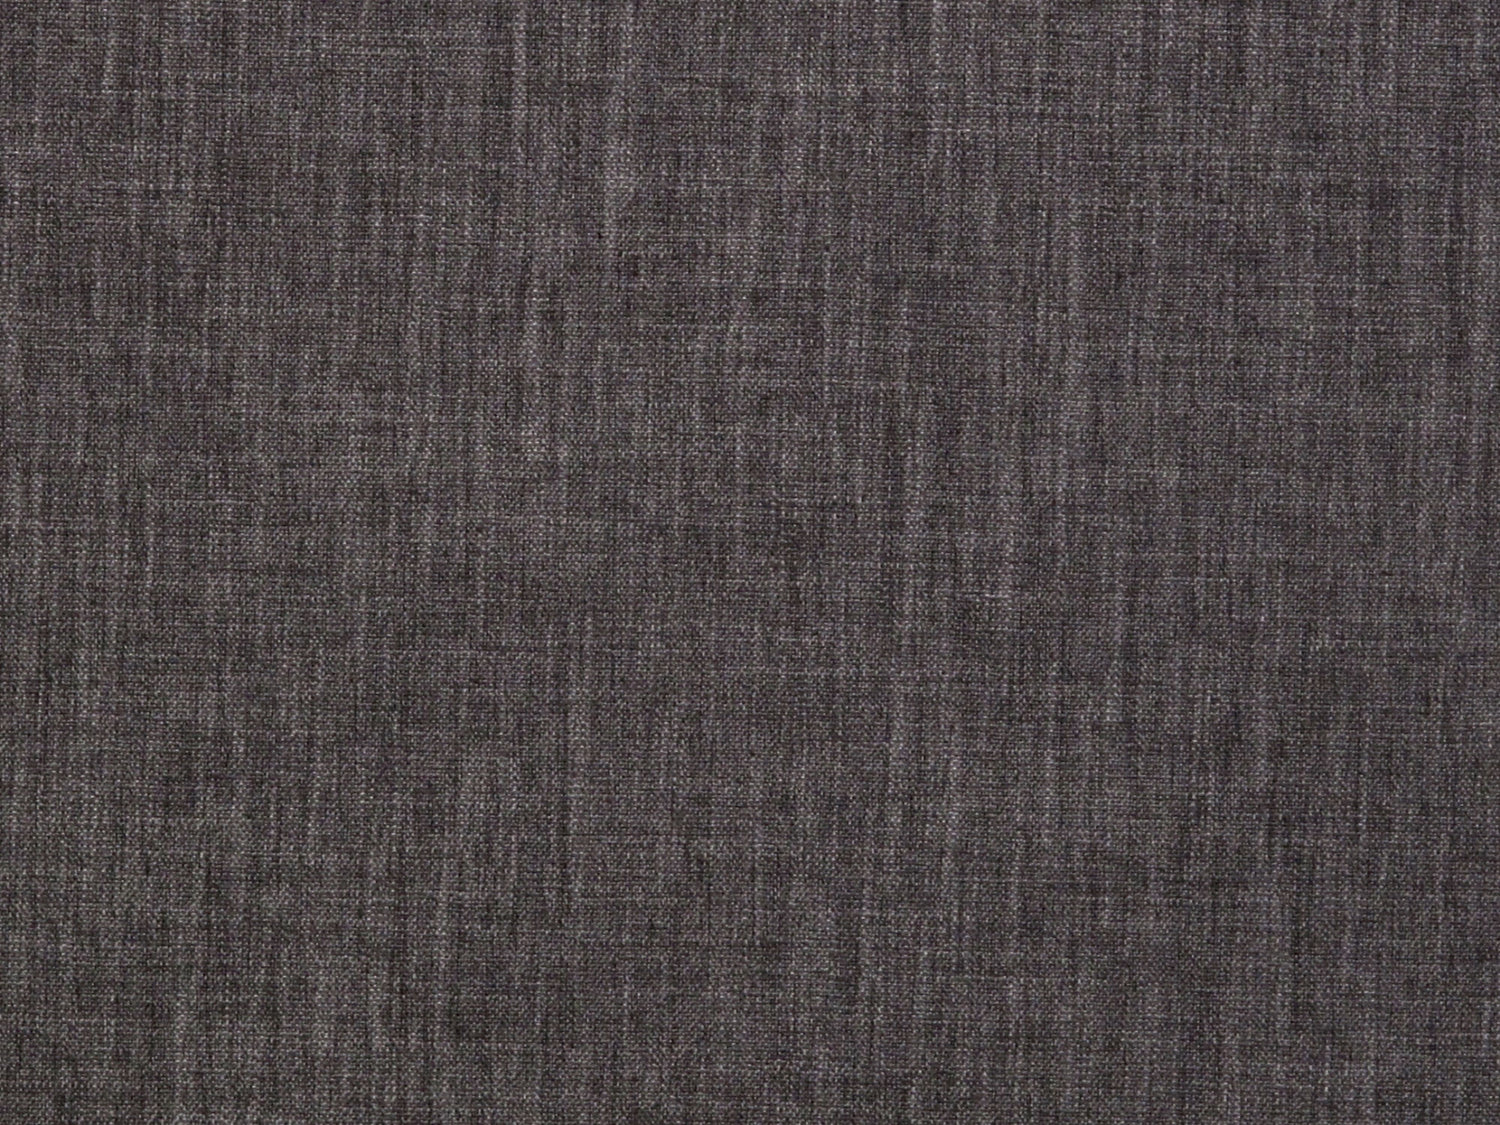 Flax fabric in ash color - pattern number H6 0014FLAX - by Scalamandre in the Old World Weavers collection